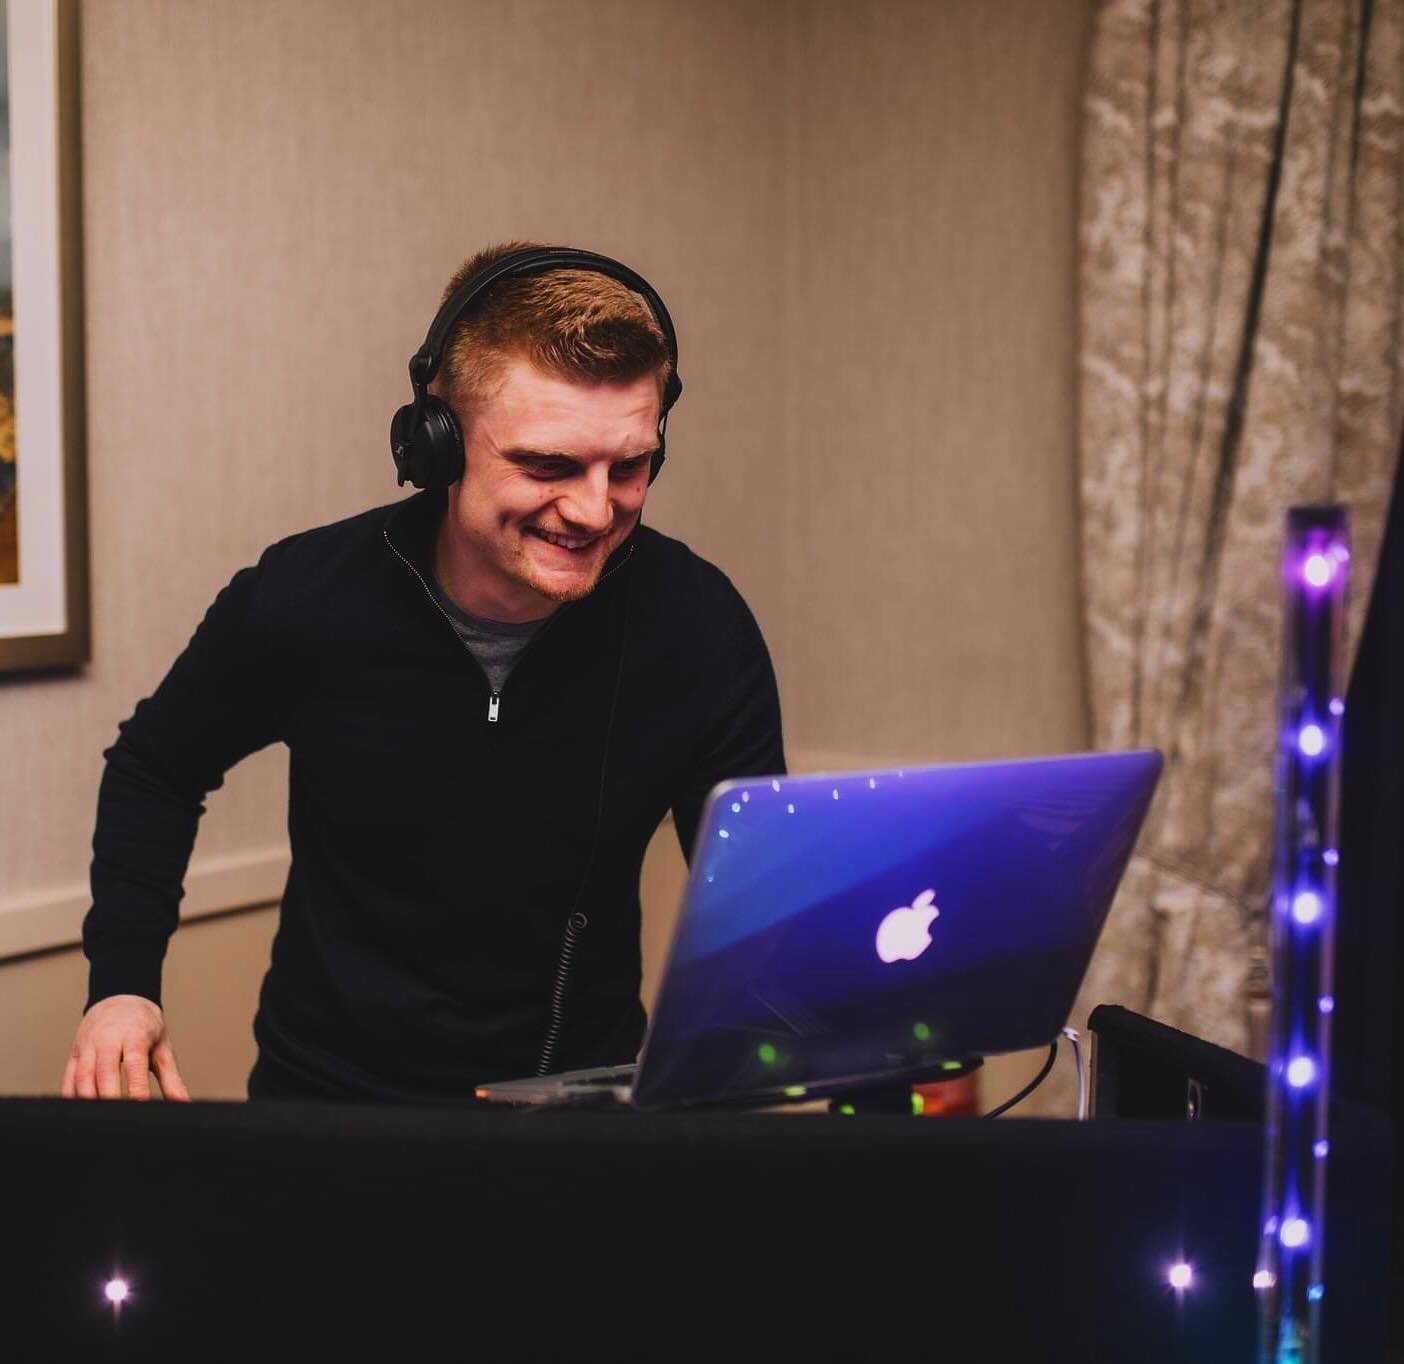 Chris&rsquo; first wedding of 2024 - captured! 

Thanks to @justleephotography for snapping this great shot @ramseyparkhotel 

#2024wedding #weddingdj @ched13y #weddingparty